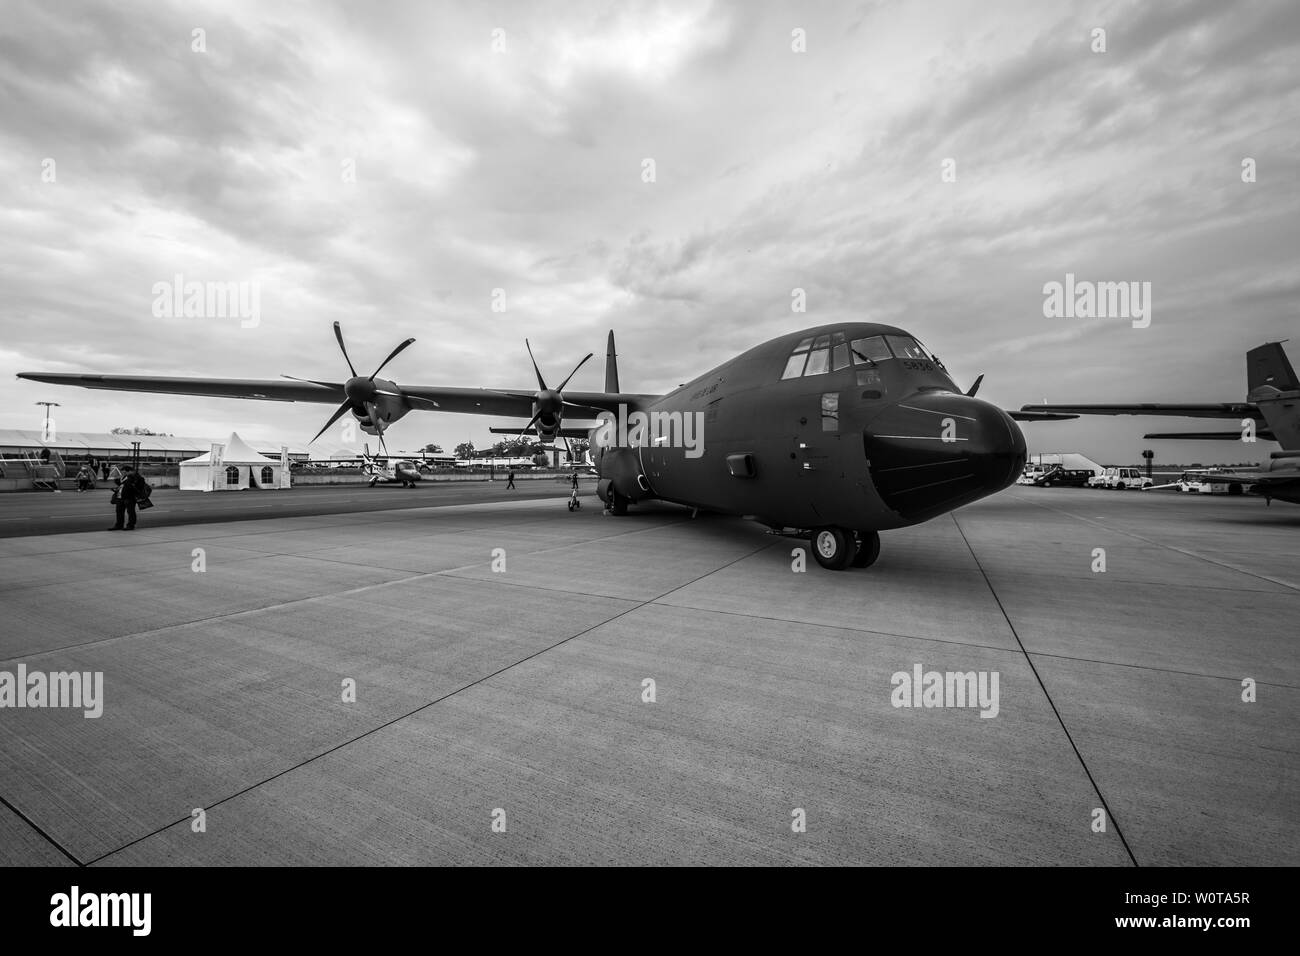 BERLIN, GERMANY - APRIL 25, 2018: Military transport, aerial refueling Lockheed Martin C-130J Super Hercules. French Air Force. Black and white. Exhibition ILA Berlin Air Show 2018 Stock Photo